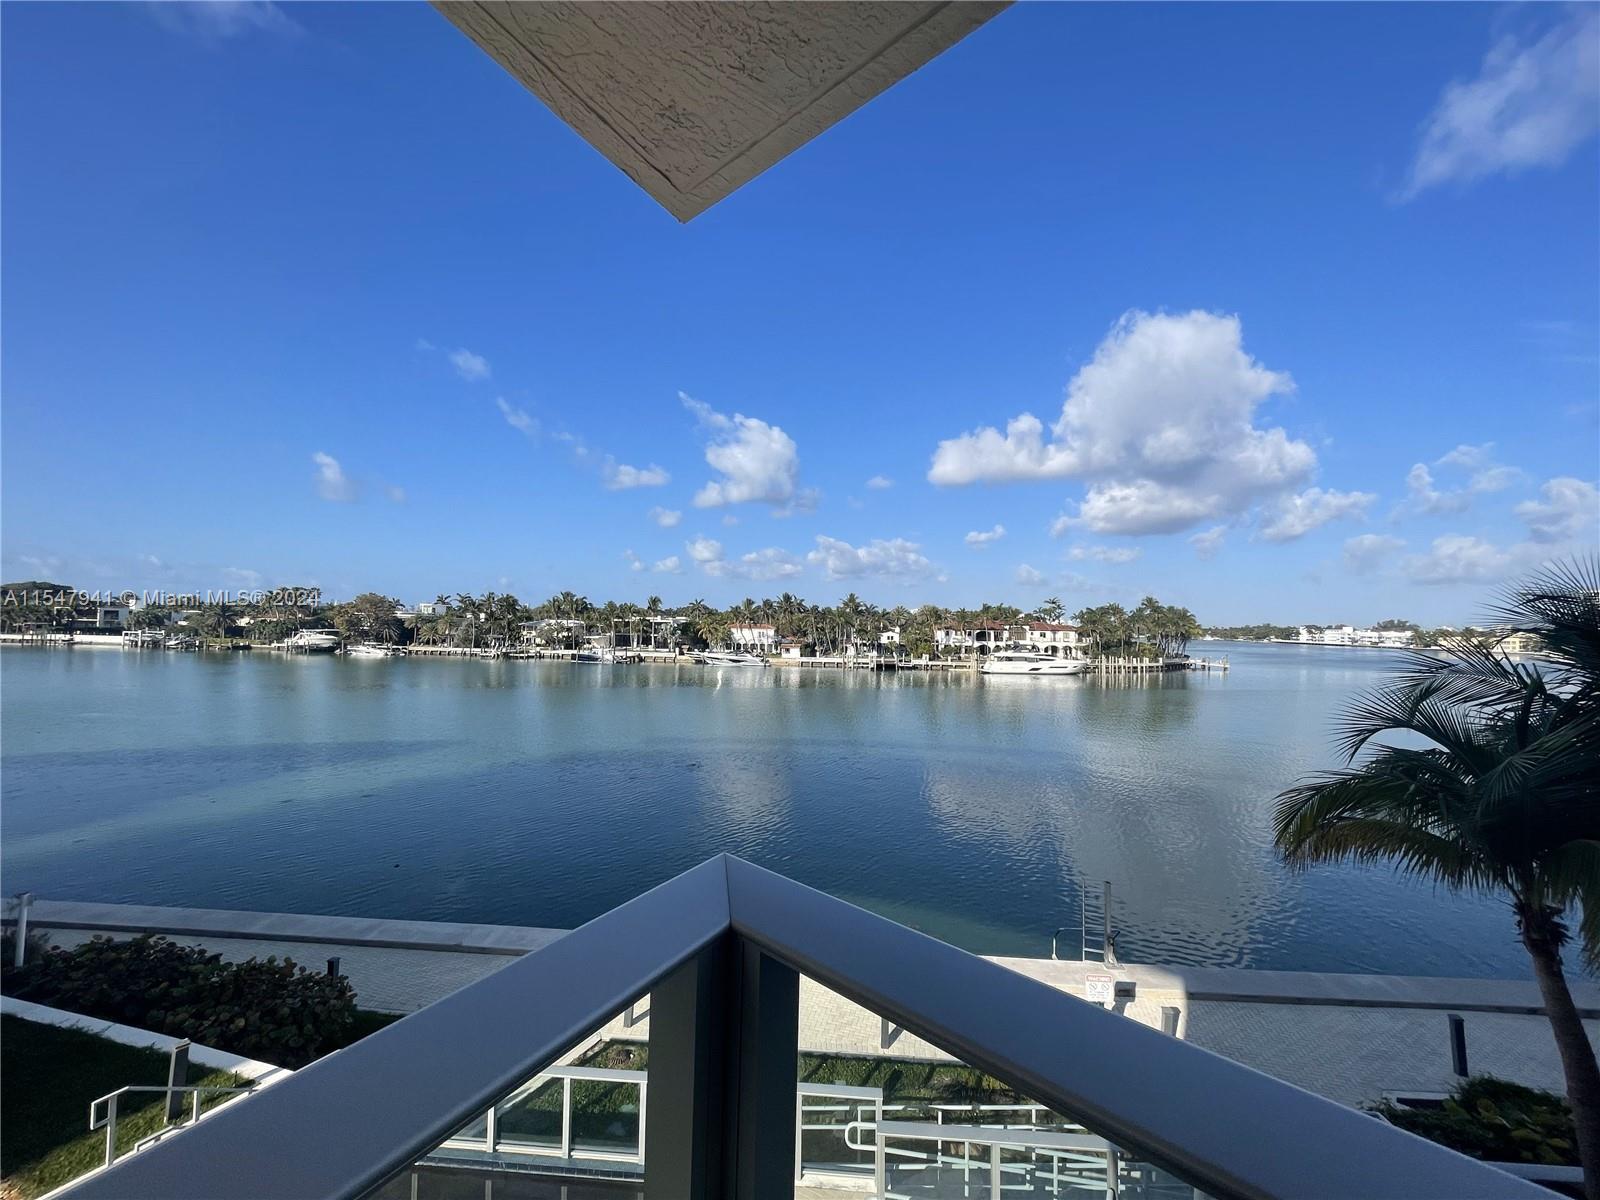 Spacious 3-bedroom condo with beautiful water views. Open gourmet kitchen, large balcony, build-out closets. Close to  the sandy beaches of the Atlantic Ocean, beachfront path to South beach, shopping and restaurants.
24 to 48 hour notice to show PLEASE